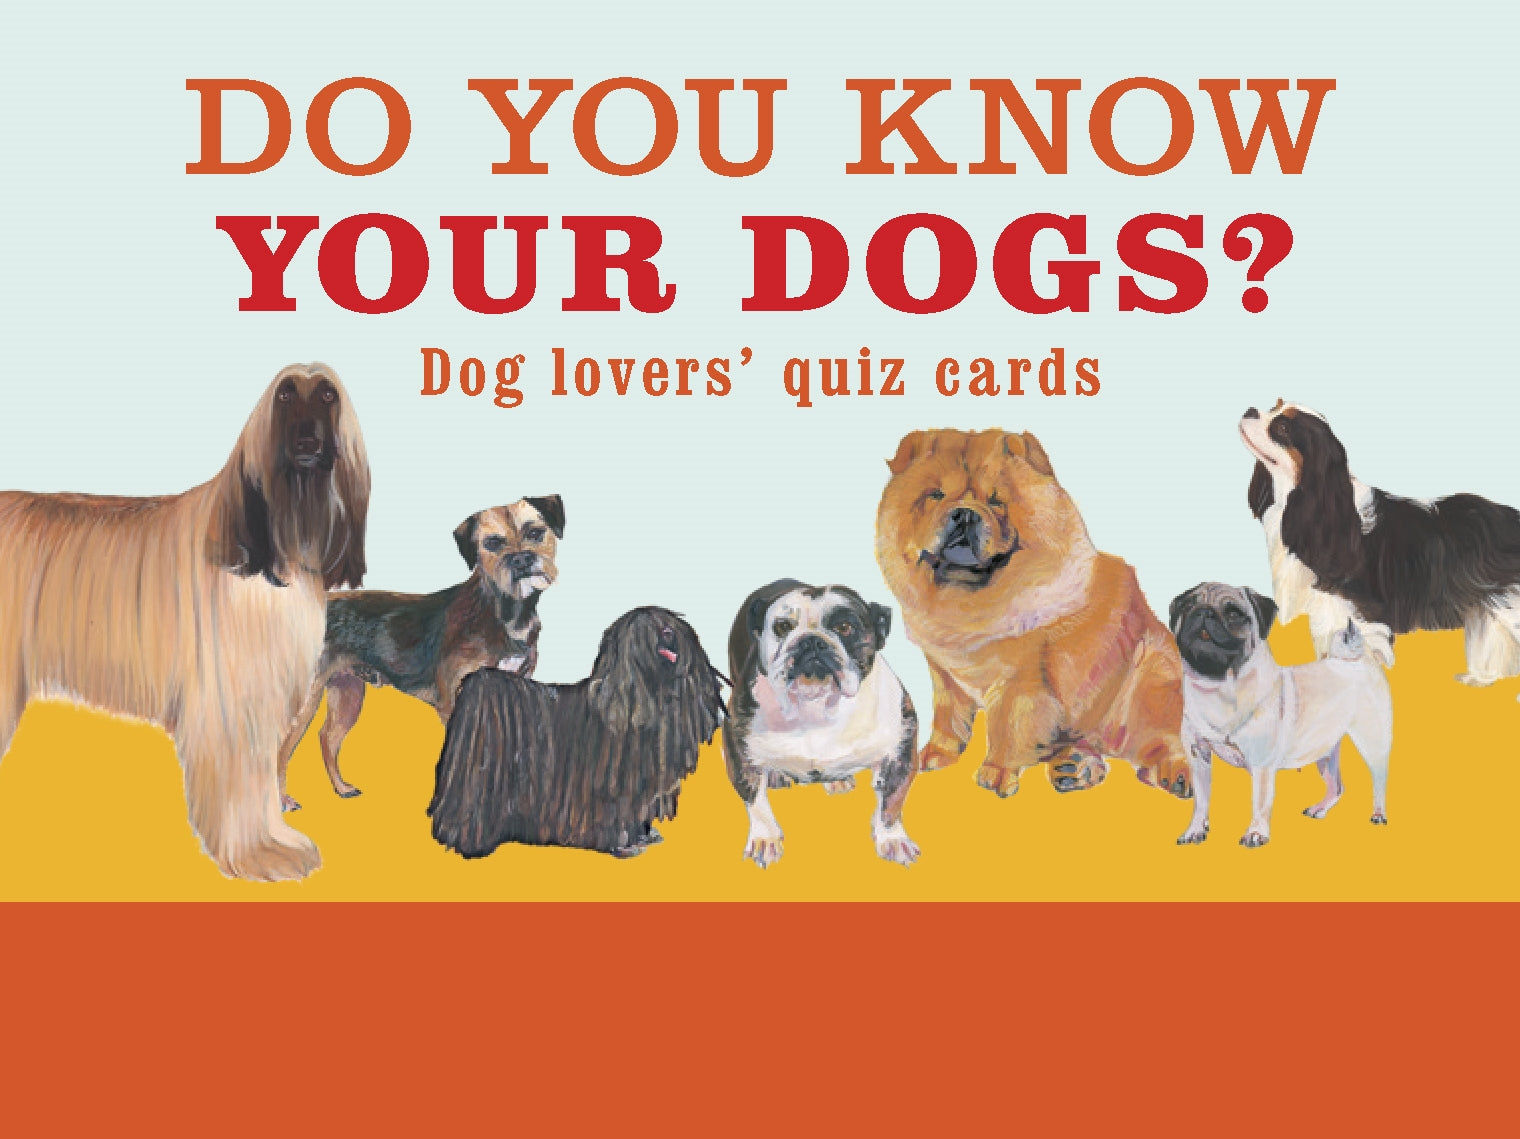 Do You Know Your Dogs? by Polly Horner, Debora Robertson